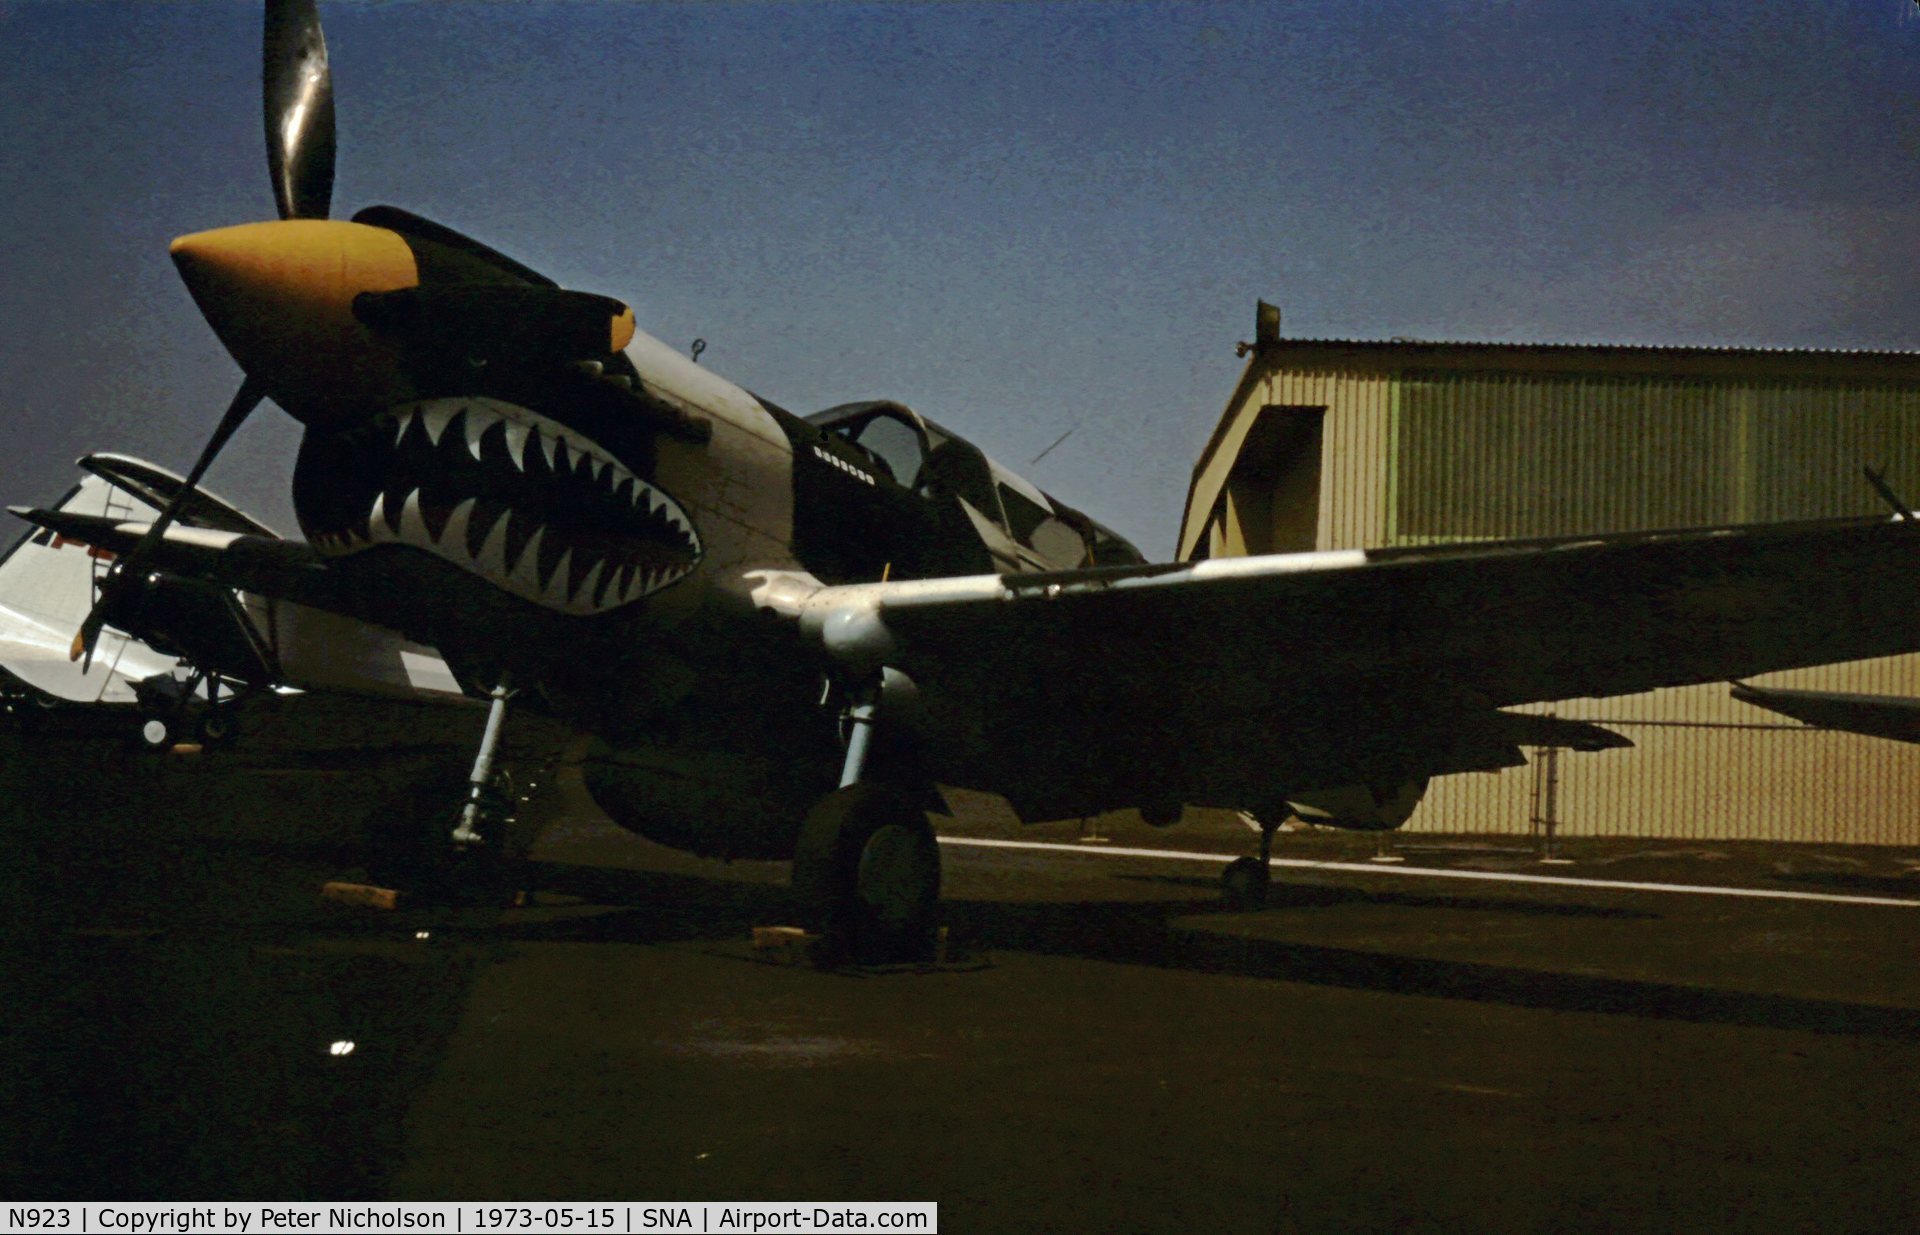 N923, 1944 Curtiss TP-40N Warhawk C/N 33915, Another view of the Tallmantz Collection's Warhawk as seen at Santa Ana in May 1973.